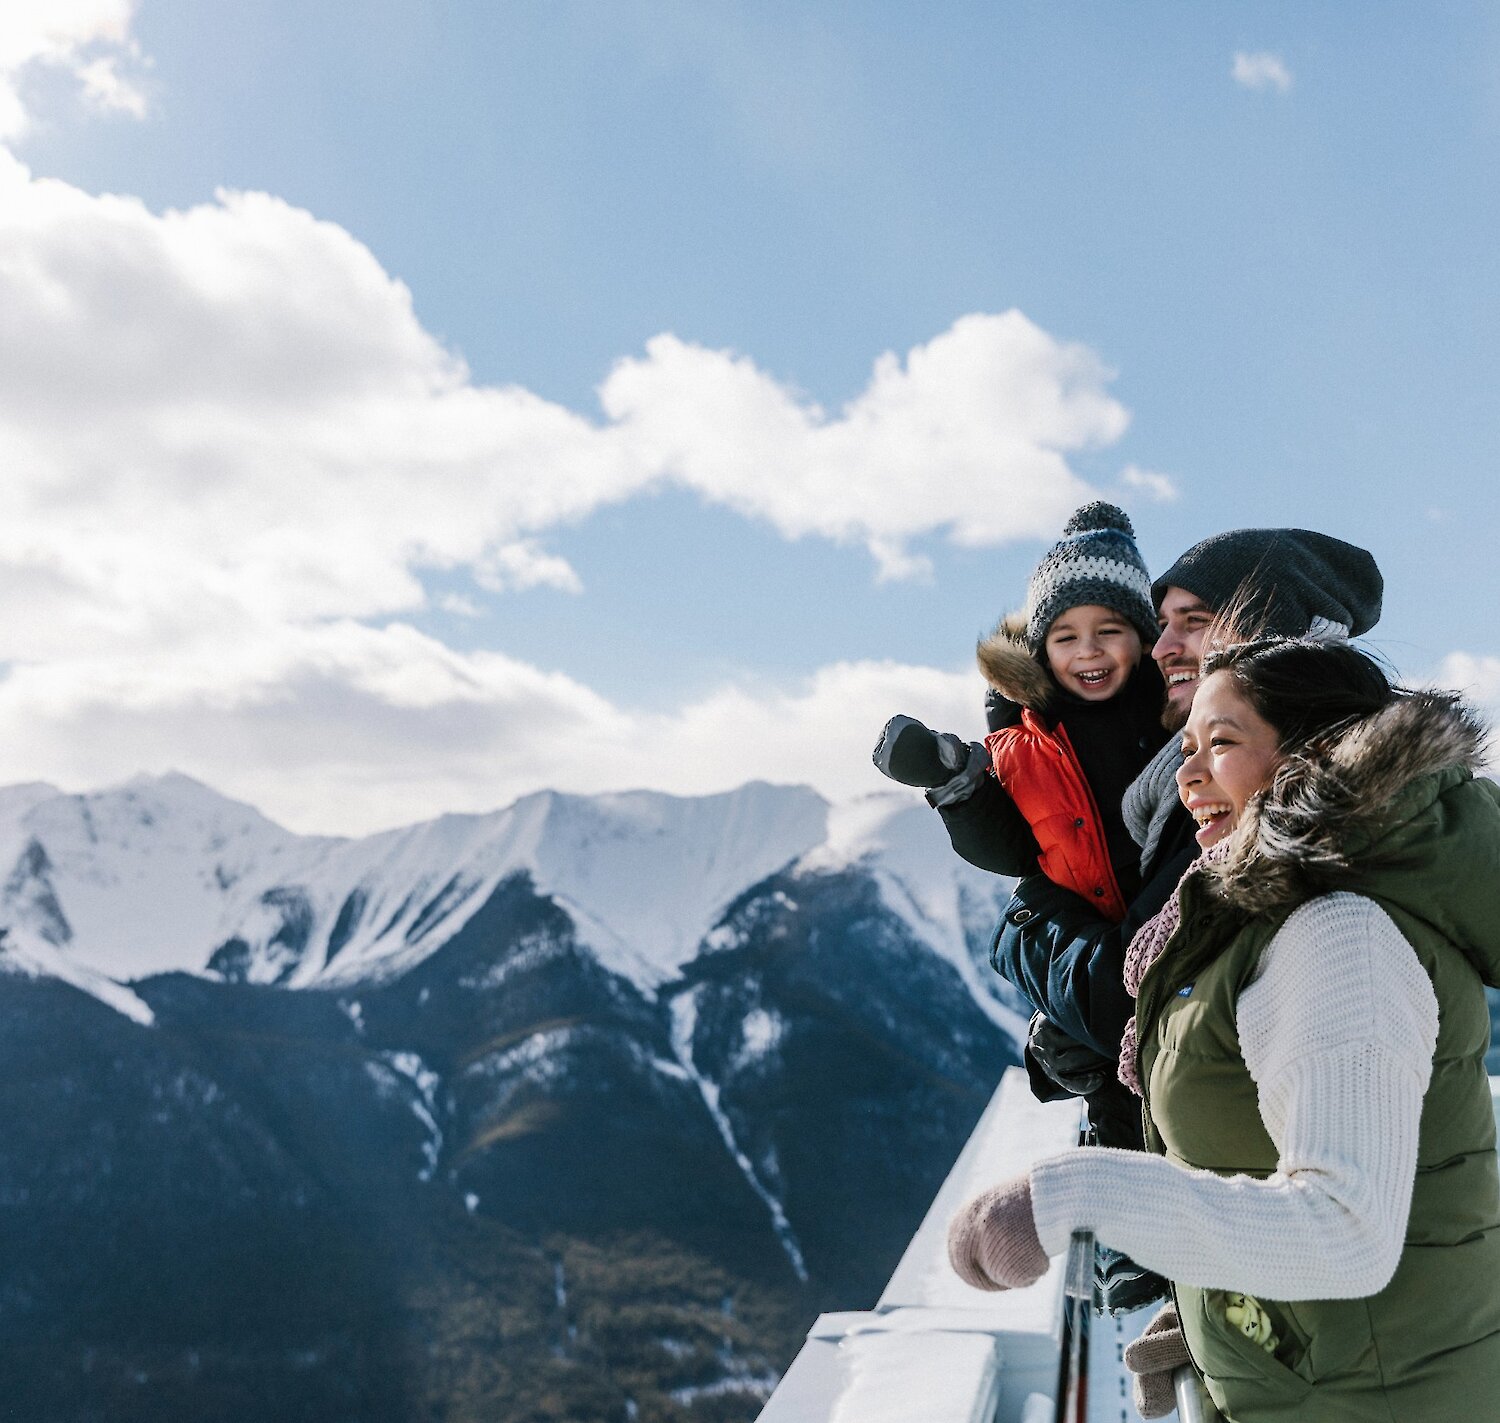 A family enjoying the views from the top of the Banff Gondola in winter